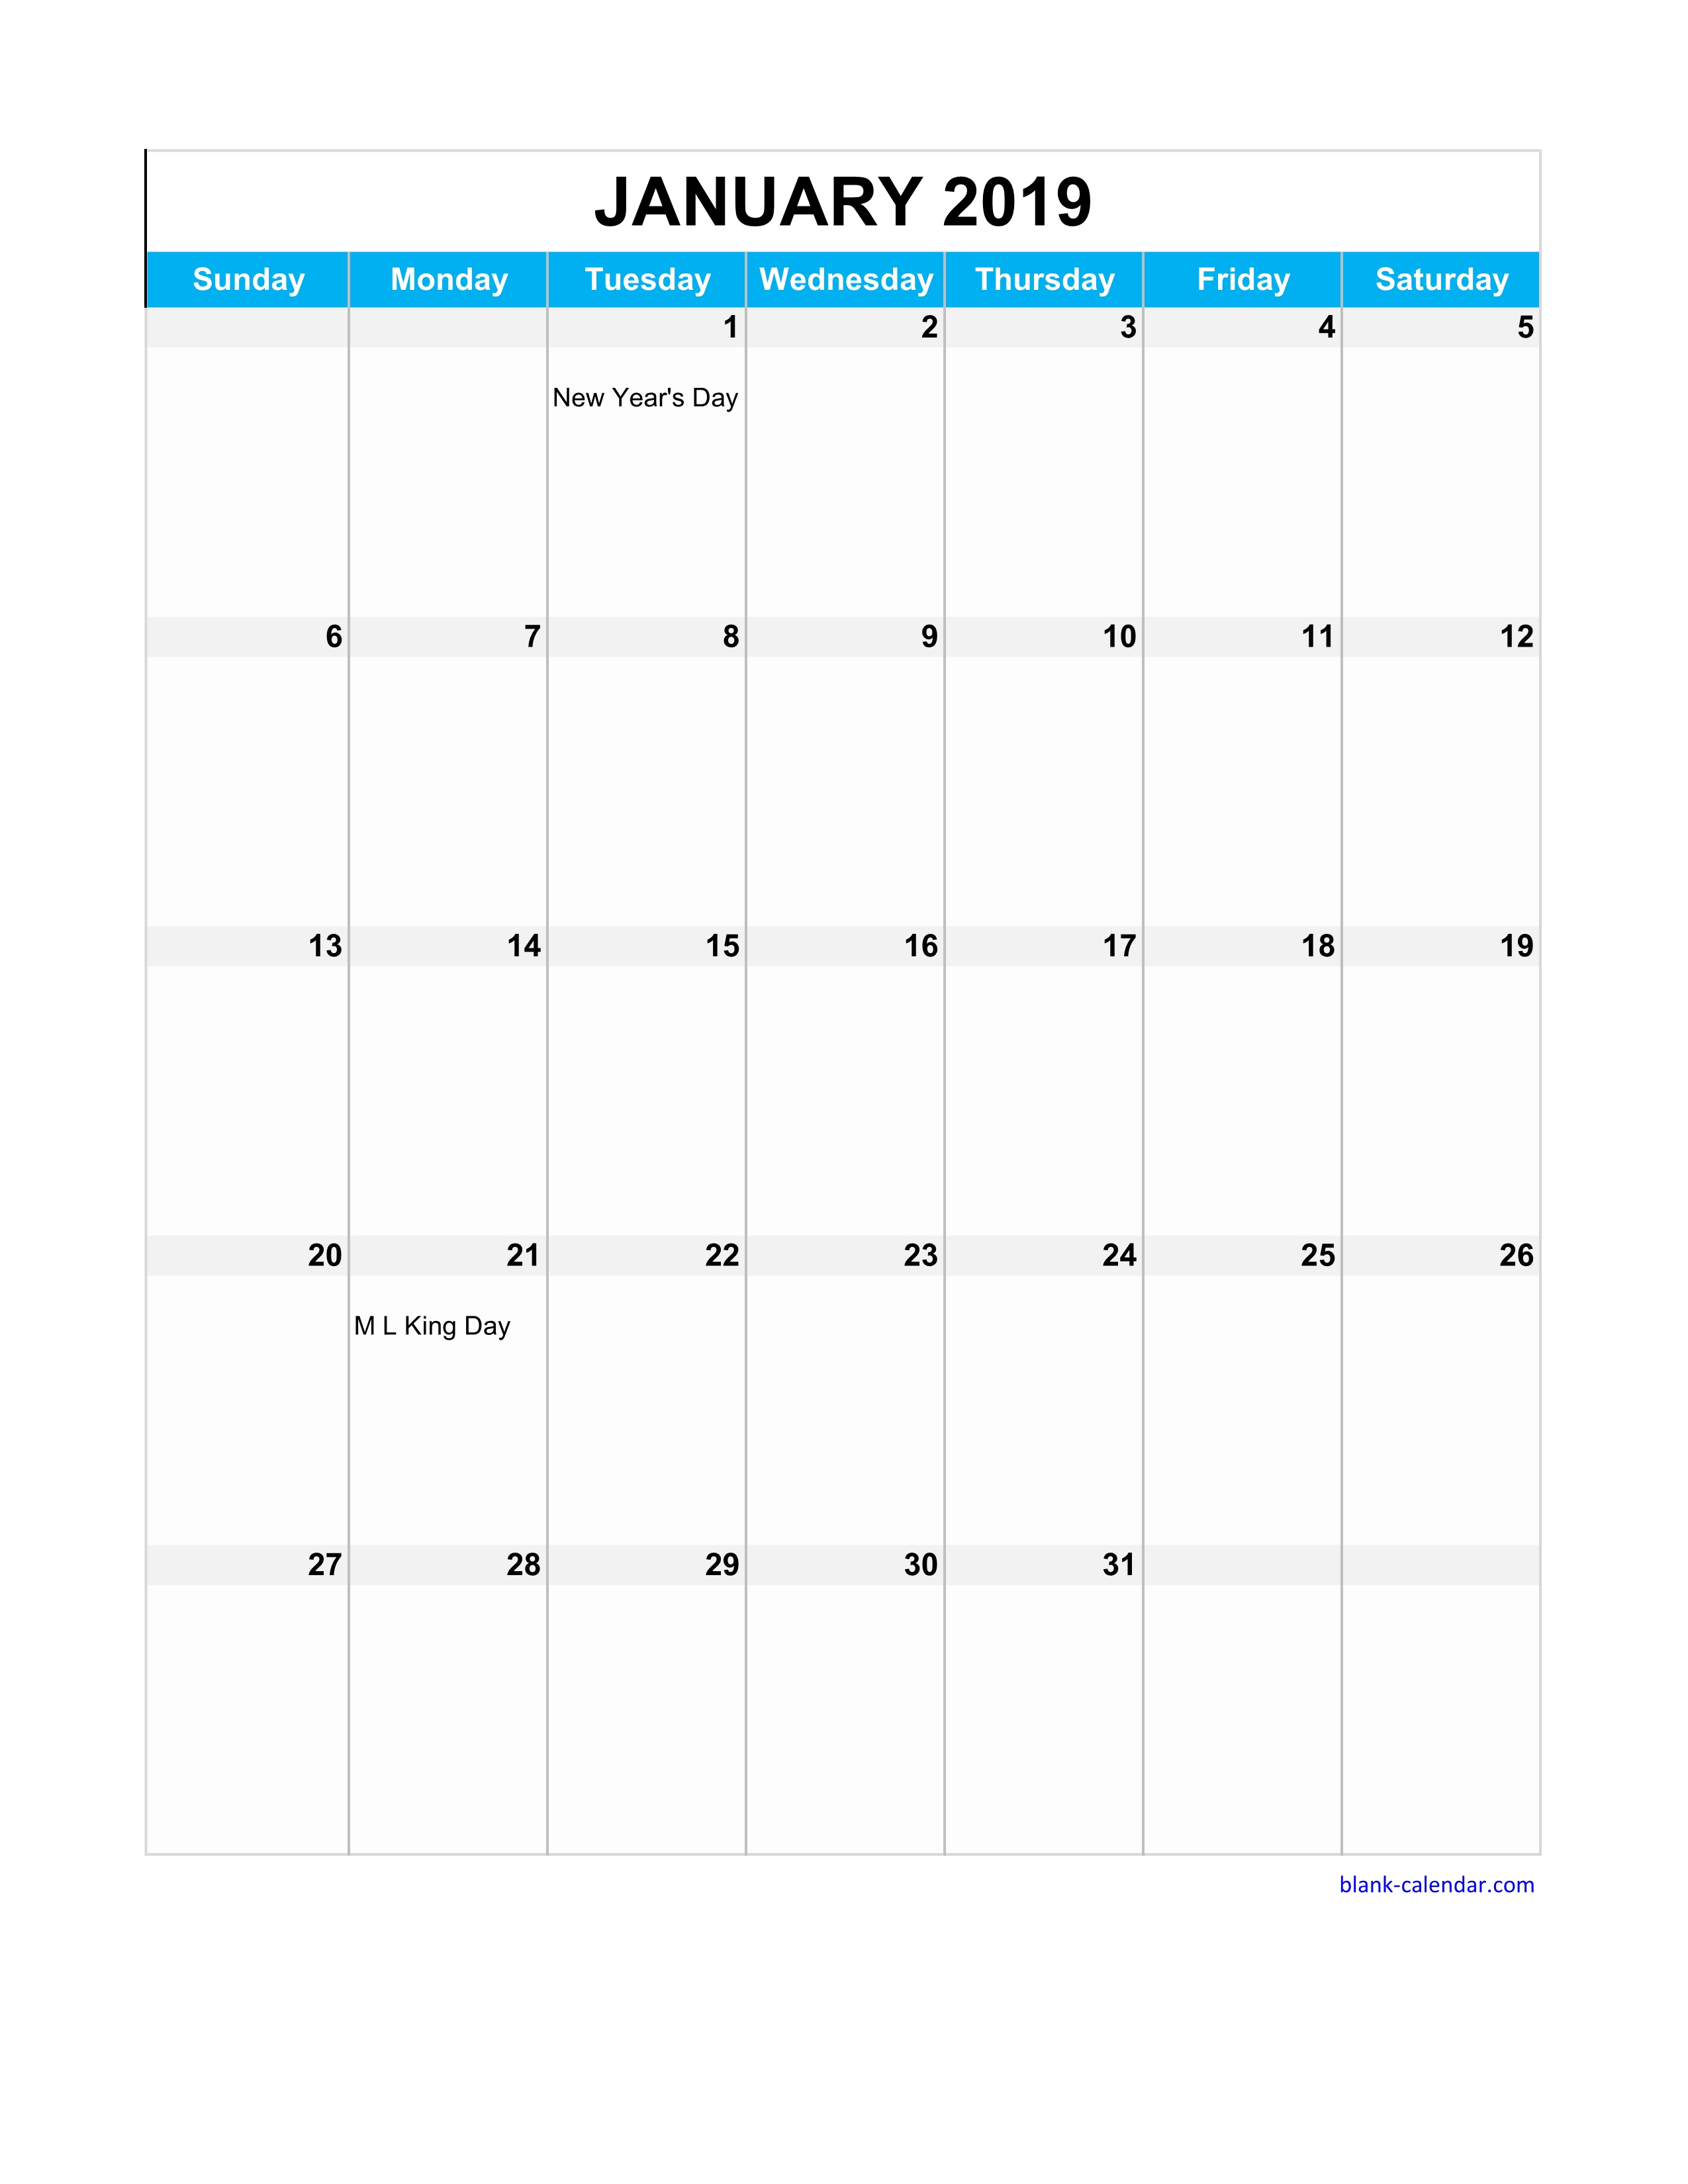 free-download-2019-excel-calendar-full-page-table-grid-us-holidays